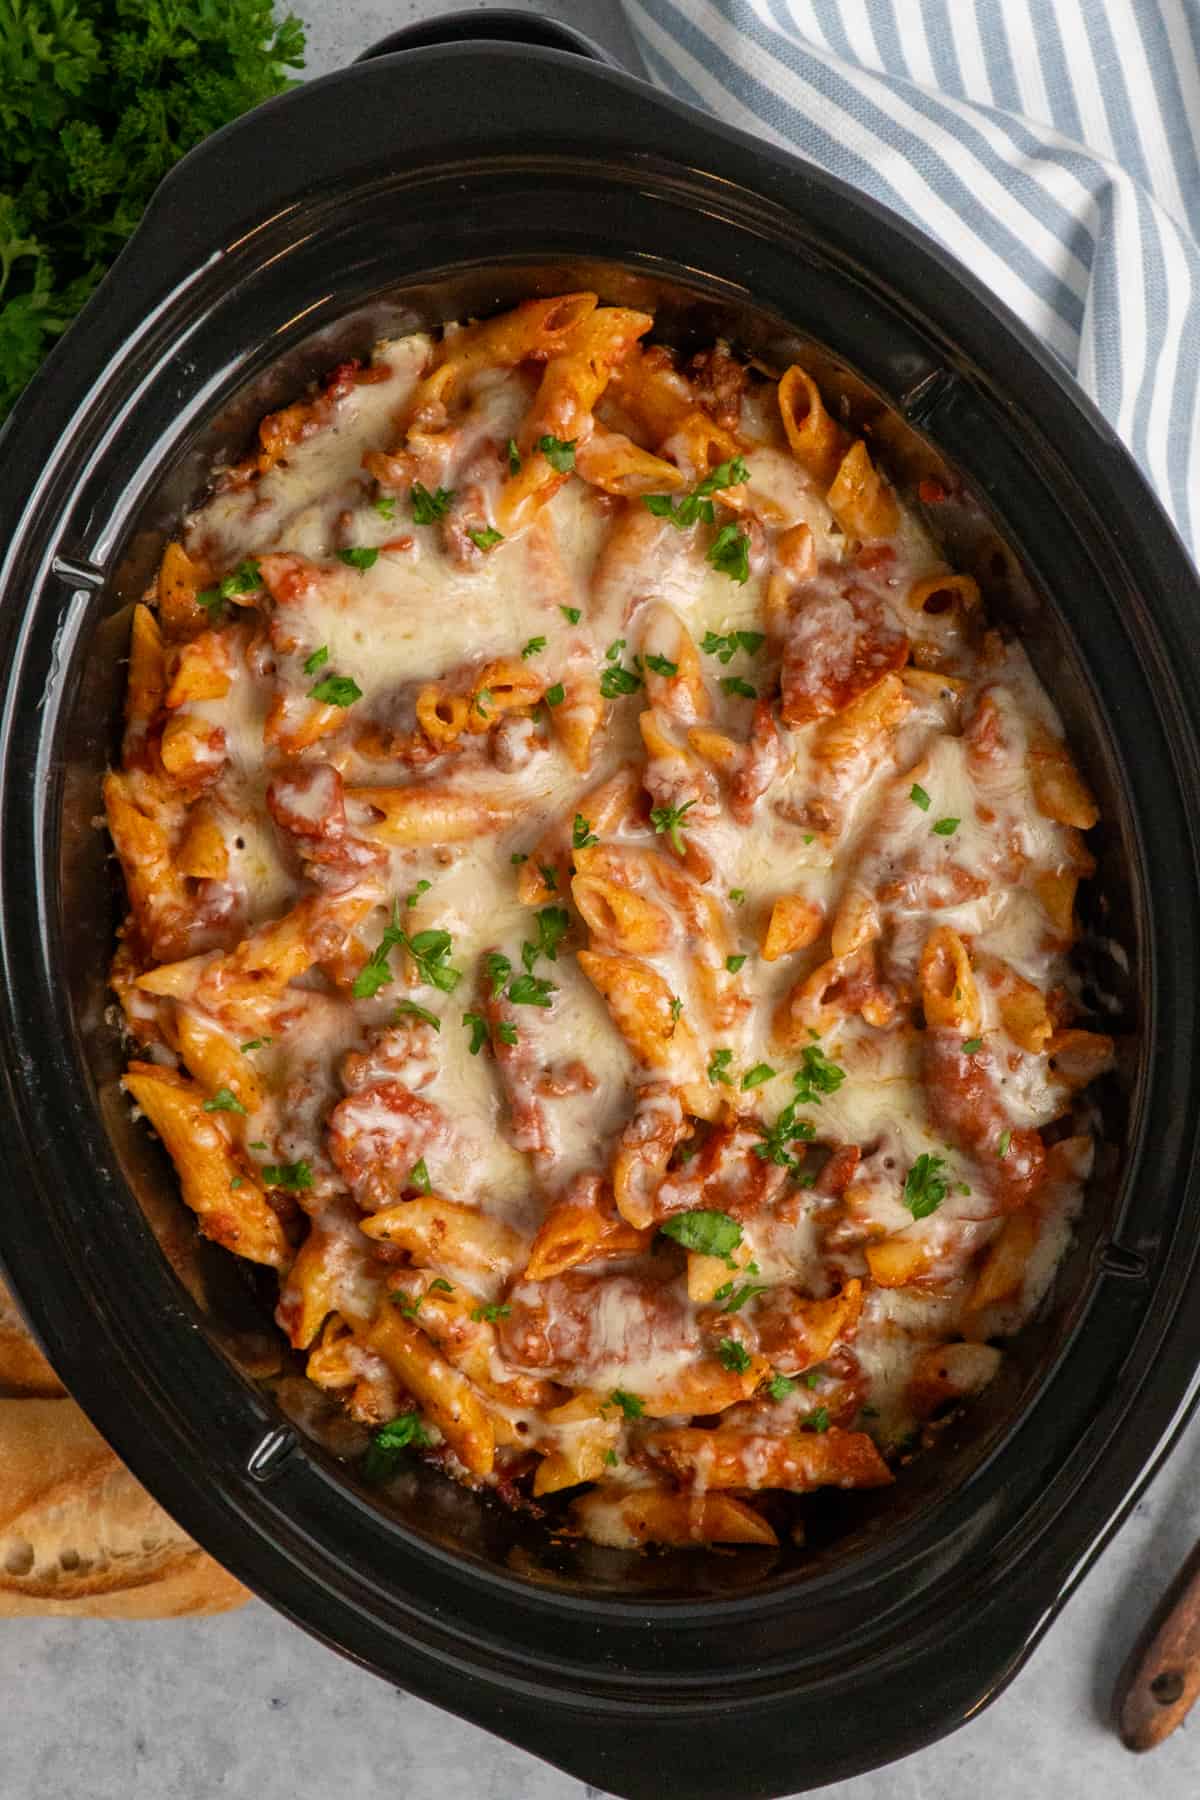 Overhead look at pizza casserole in a slow cooker.